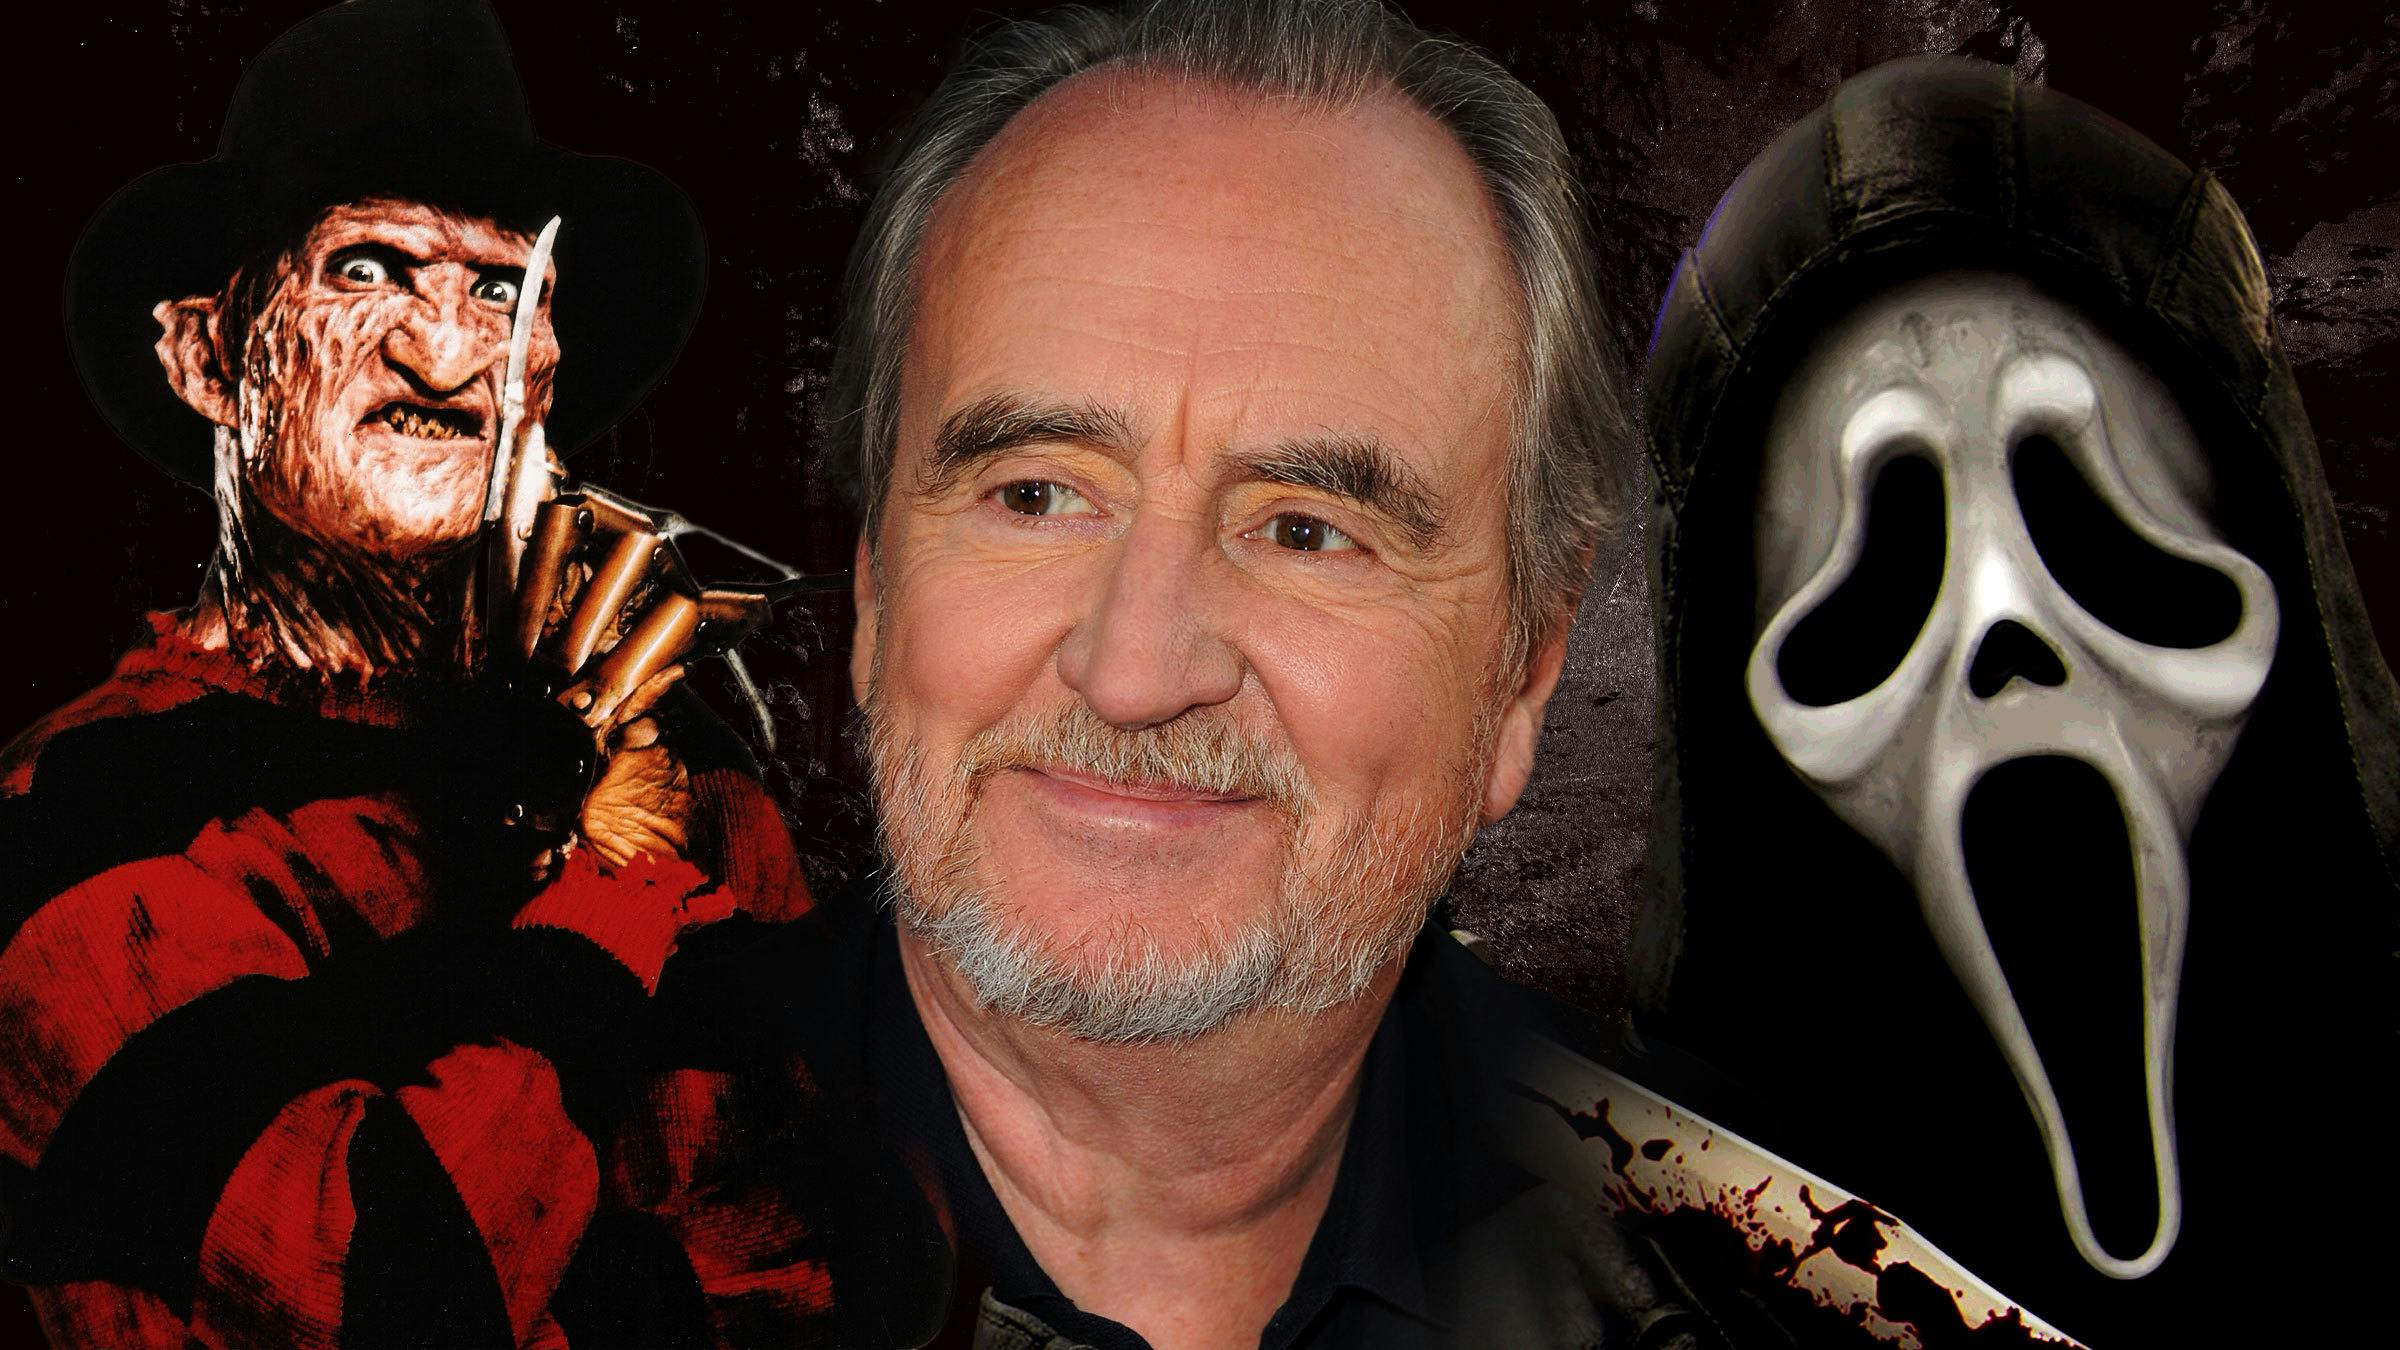 The Metal Community Remembers Horror Icon Wes Craven